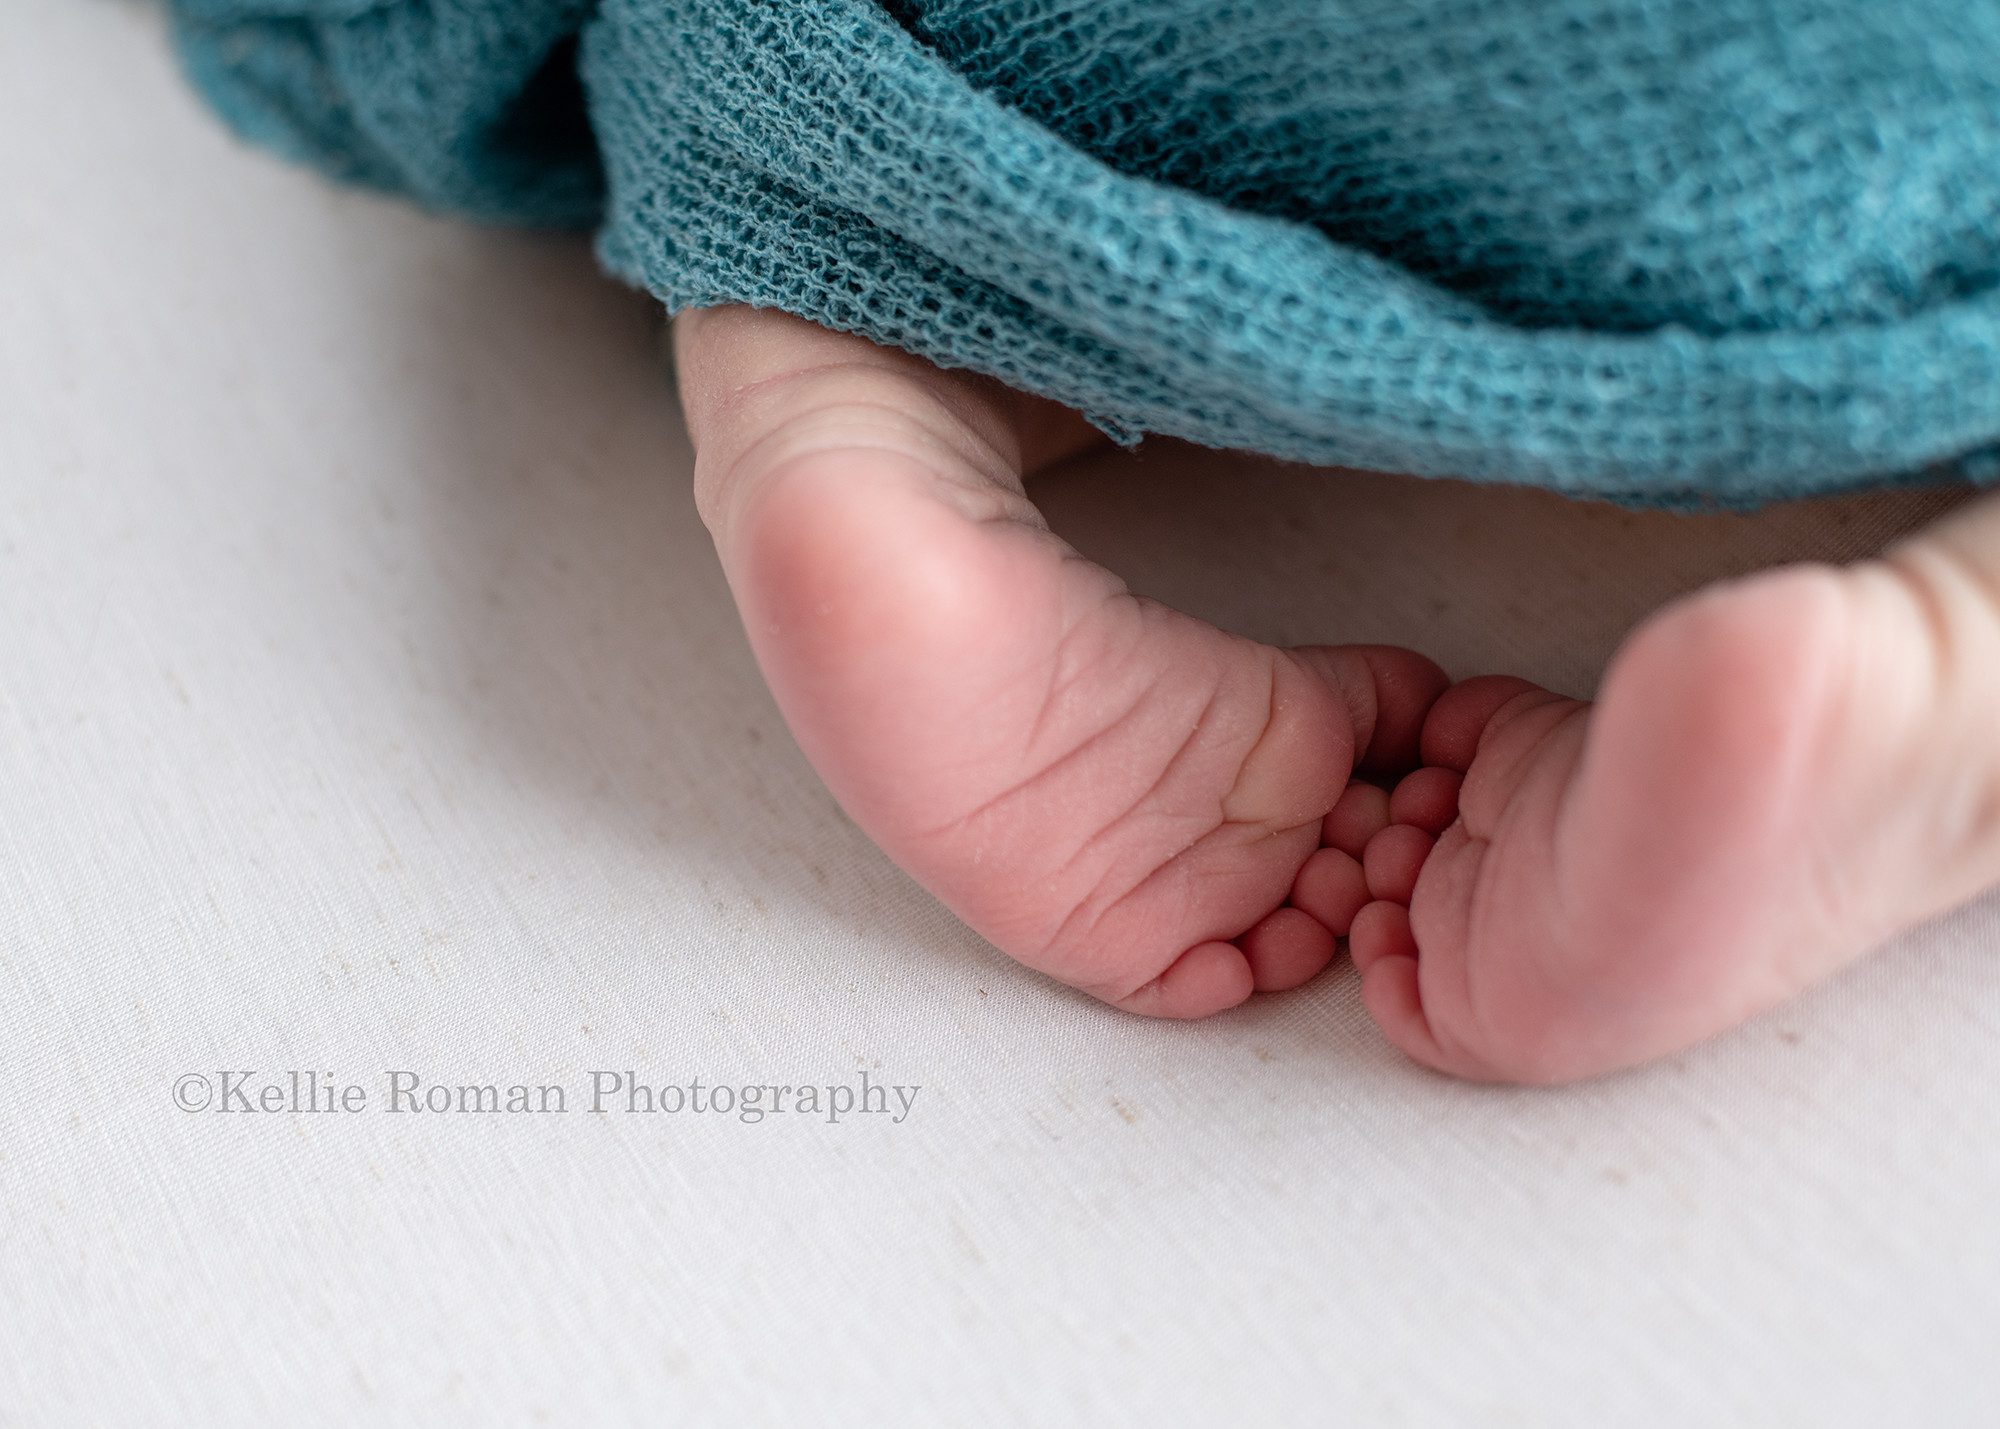 studio newborn session a newborn baby boy is in a milwaukee photographers studio. the image is a close up shot of the babies feet while he is laying on his belly. His diaper is covered up with a teal wrap.